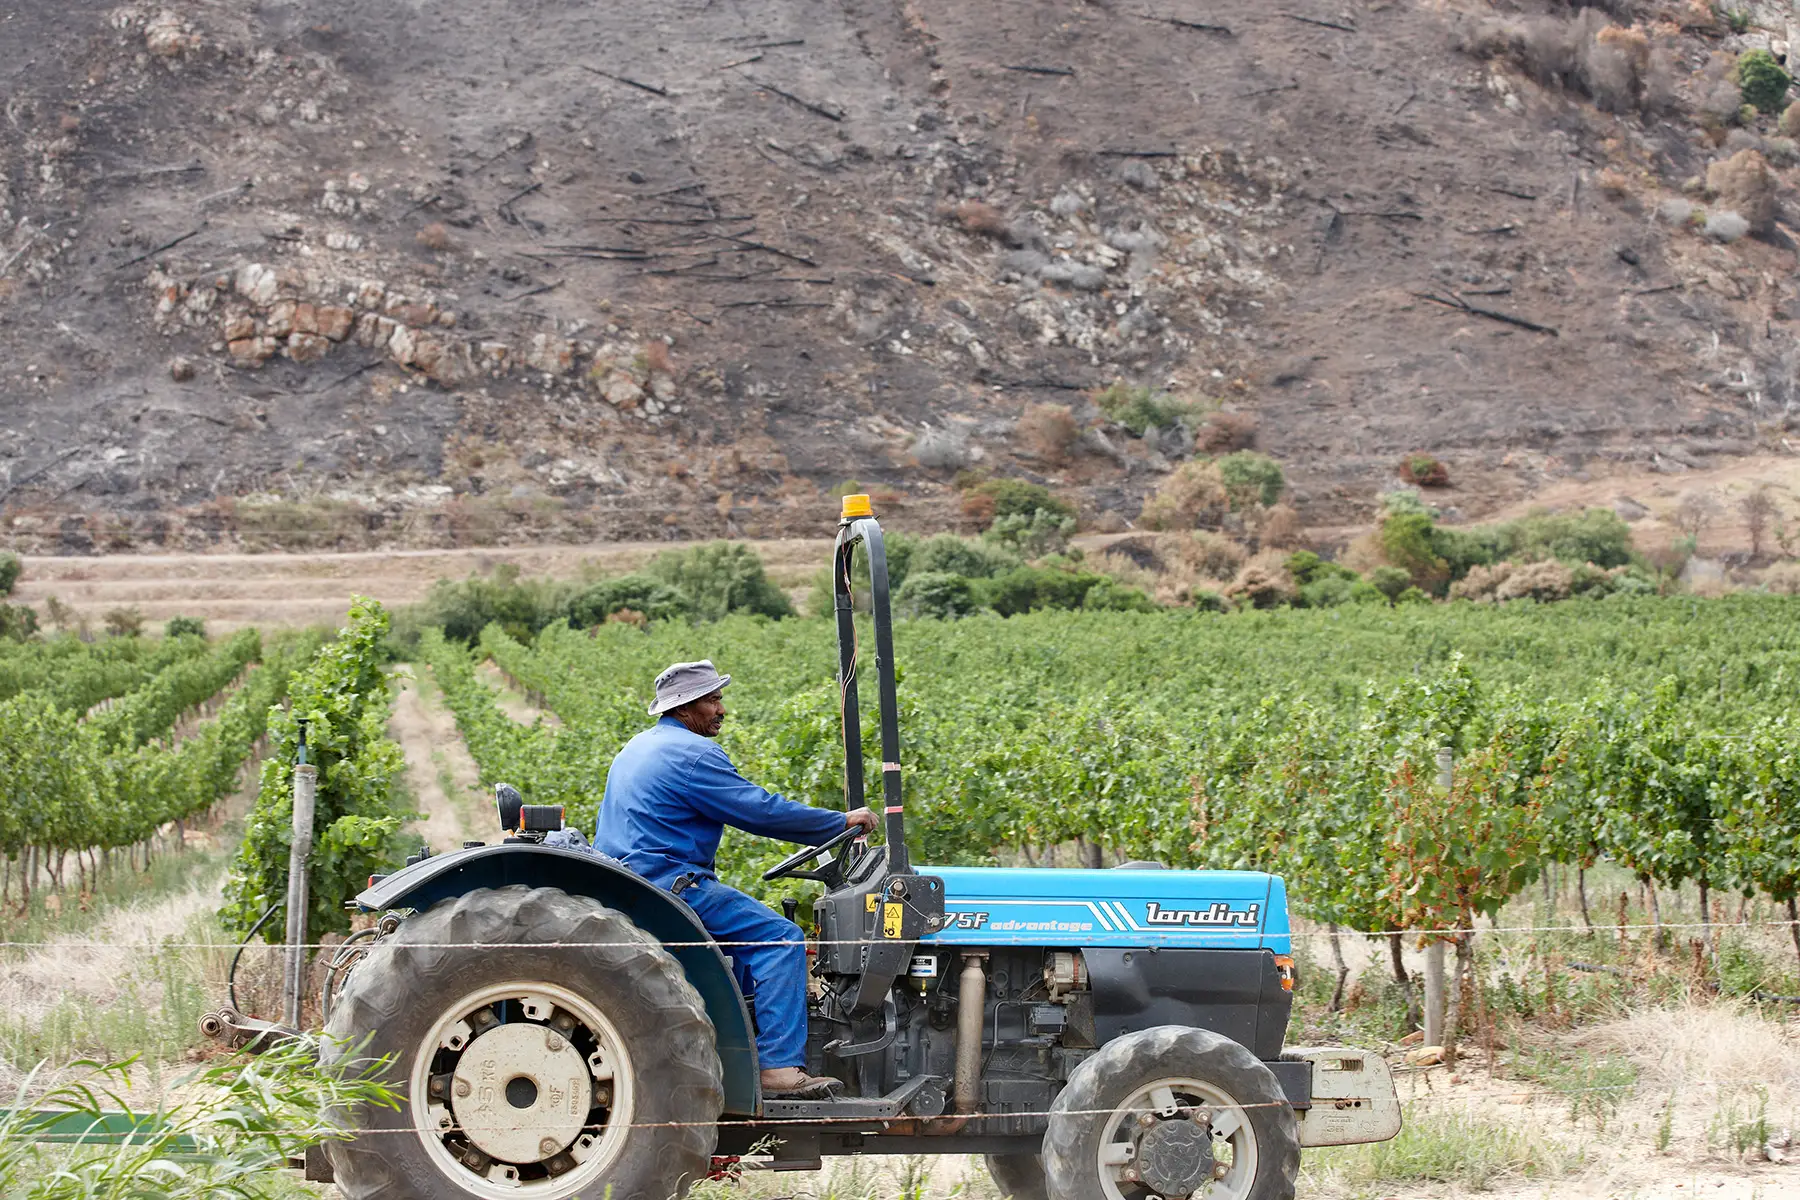 Farmworker driving a tractor through a vineyard in the countryside outside Cape Town